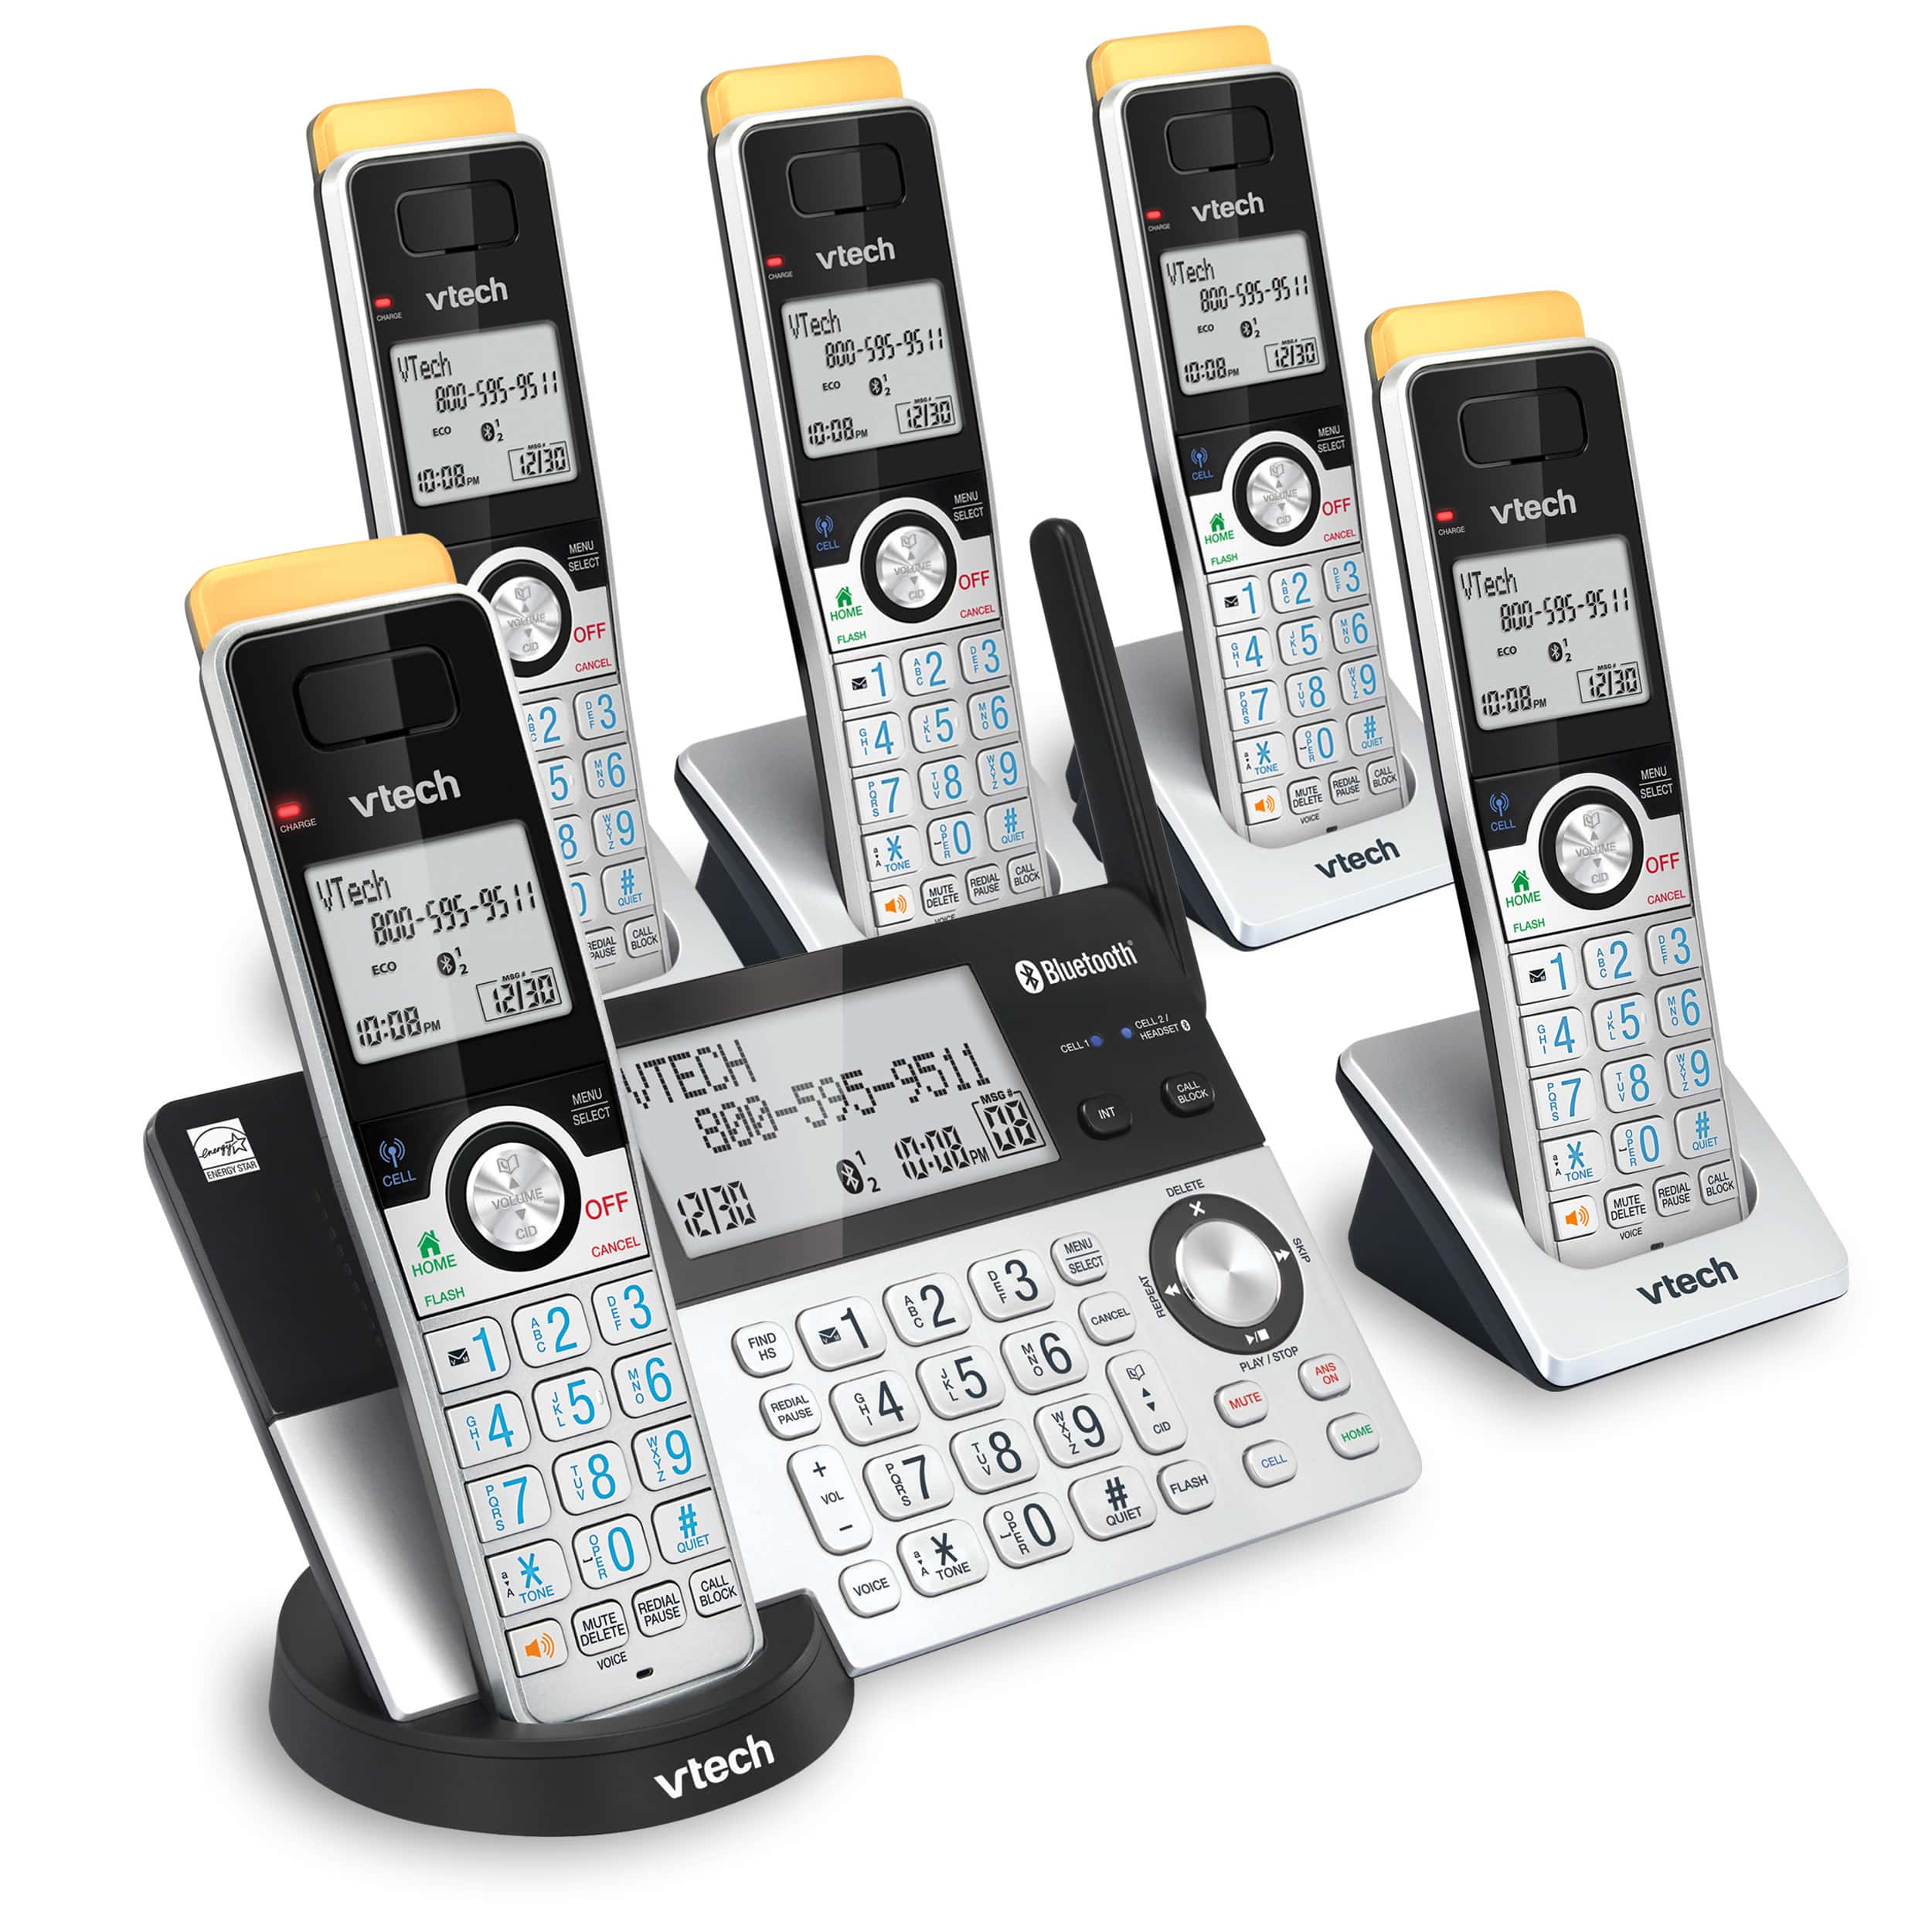 5-Handset Expandable Cordless Phone with Super Long Range, Bluetooth Connect to Cell, Smart Call Blocker and Answering System - view 10